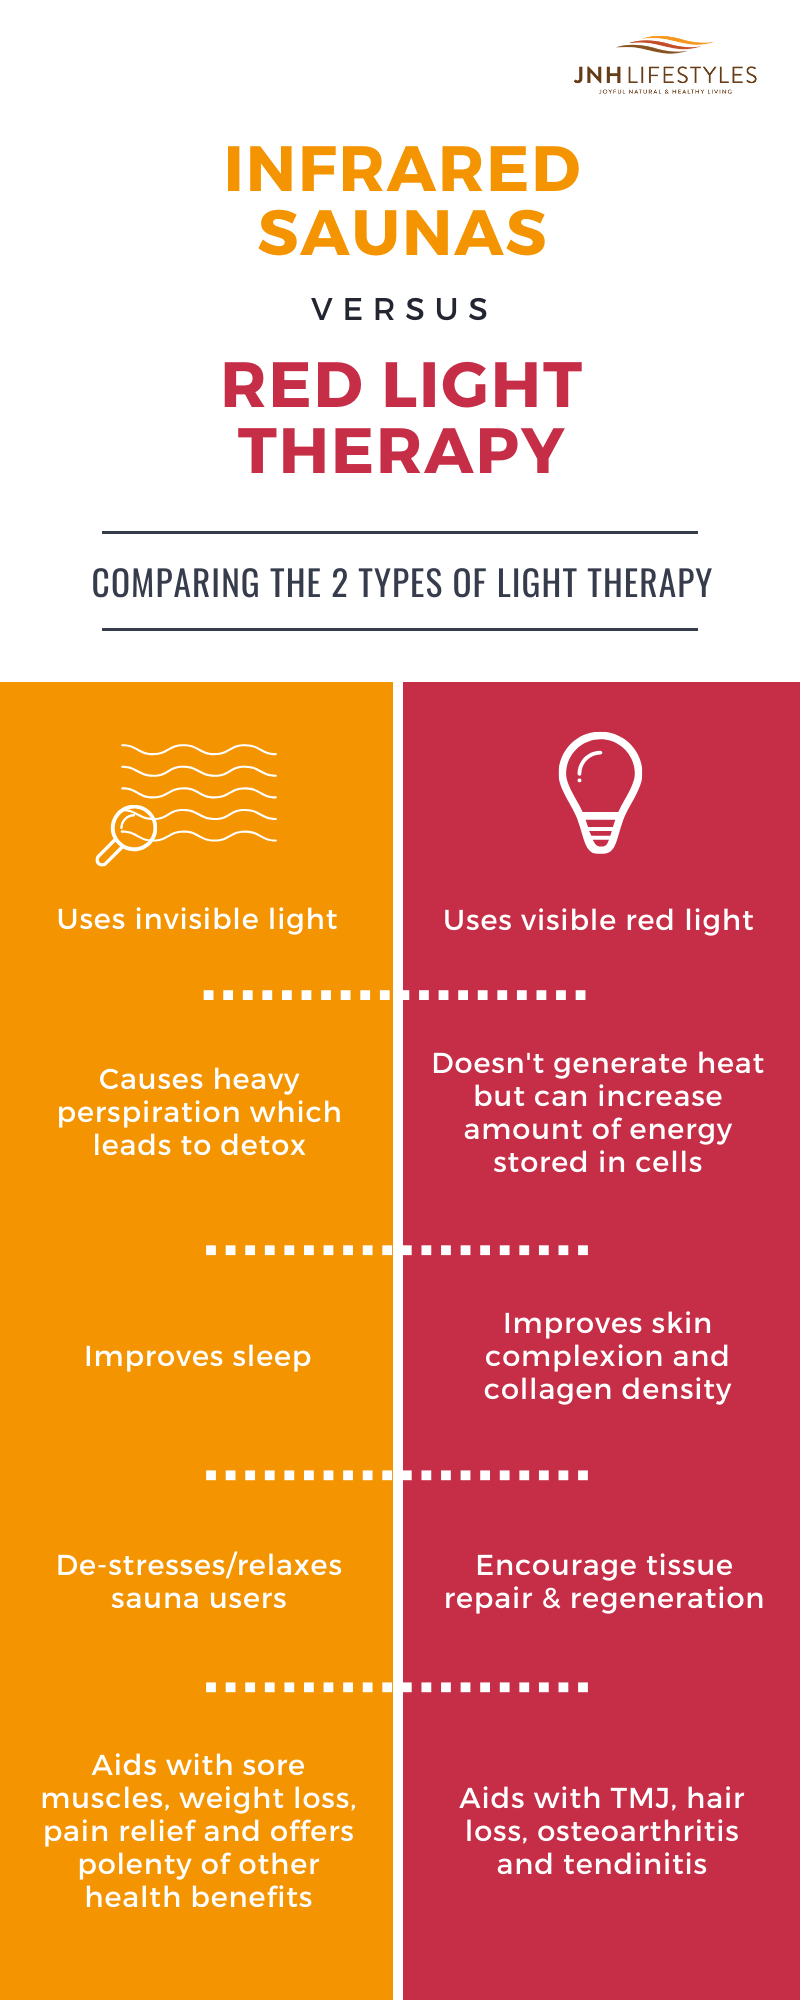 What Is Red Light Therapy Used For